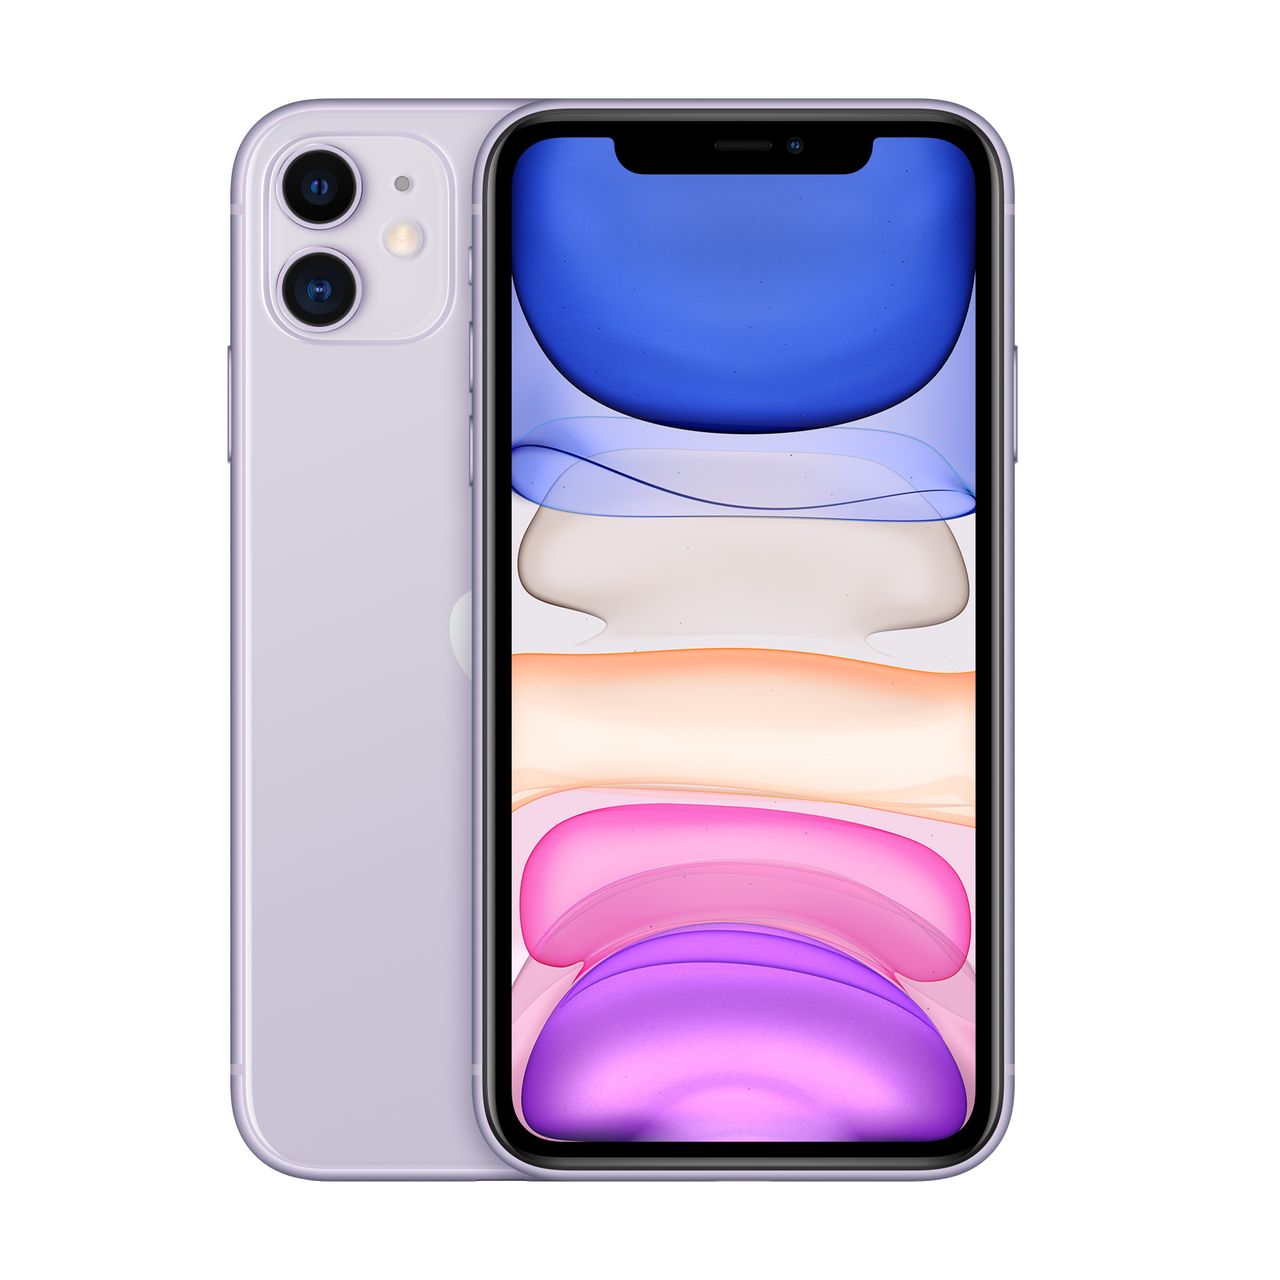 Apple iPhone 11 256GB in Purple Review